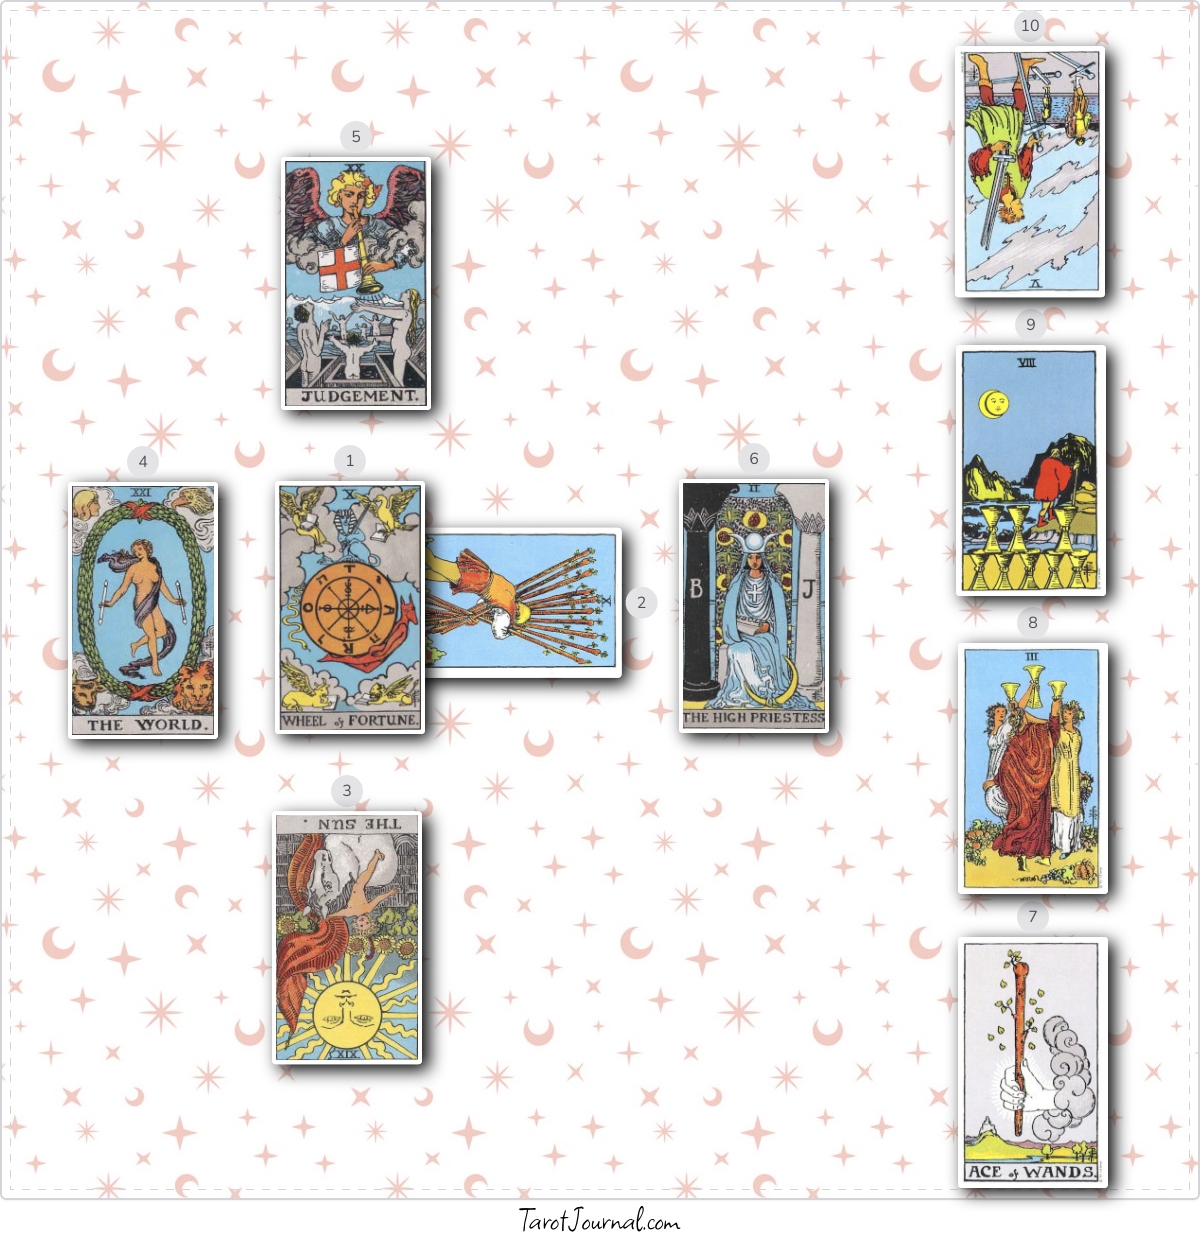 What is Sue Brower really wanting to know about? - tarot reading by Jeremy Brower